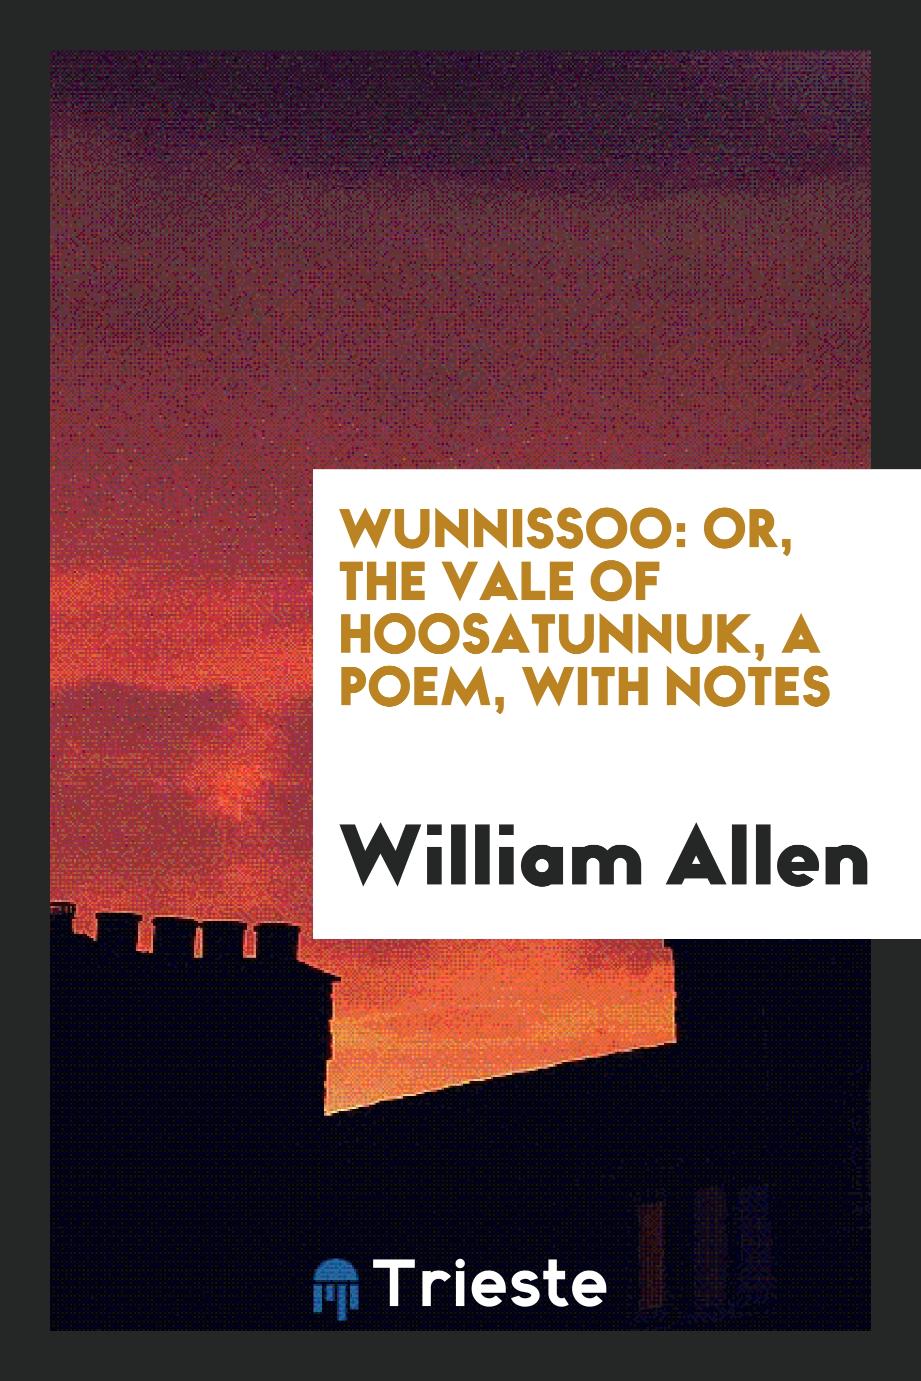 Wunnissoo: or, The vale of Hoosatunnuk, a poem, with notes